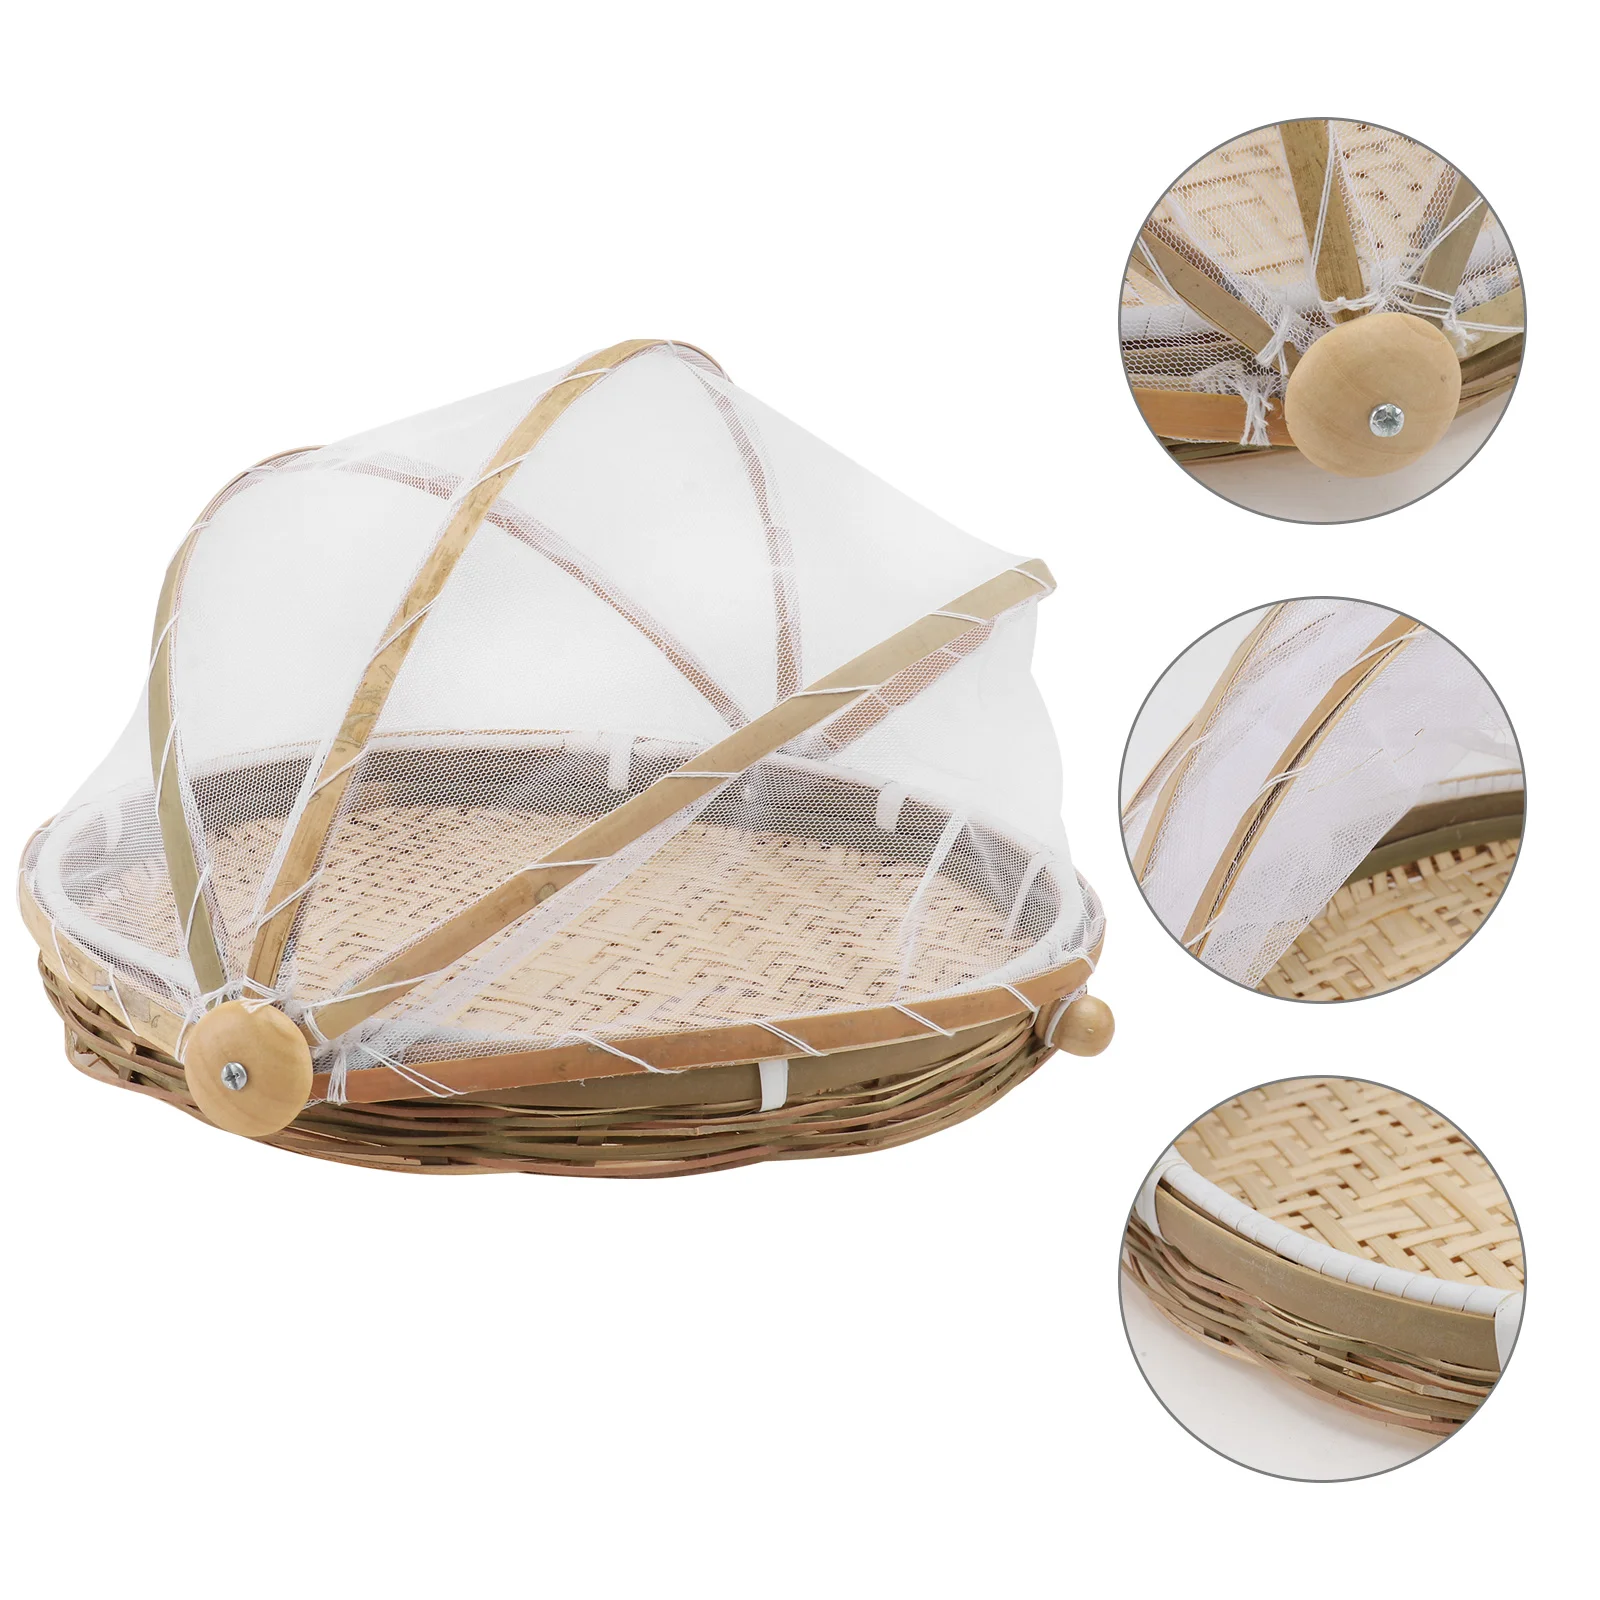 

Basket Bamboo Serving Woven Tent Cover Tray Bread Wicker Baskets Storage Fruit Rattan Picnic Screen Flat Covered Mesh Round Hand